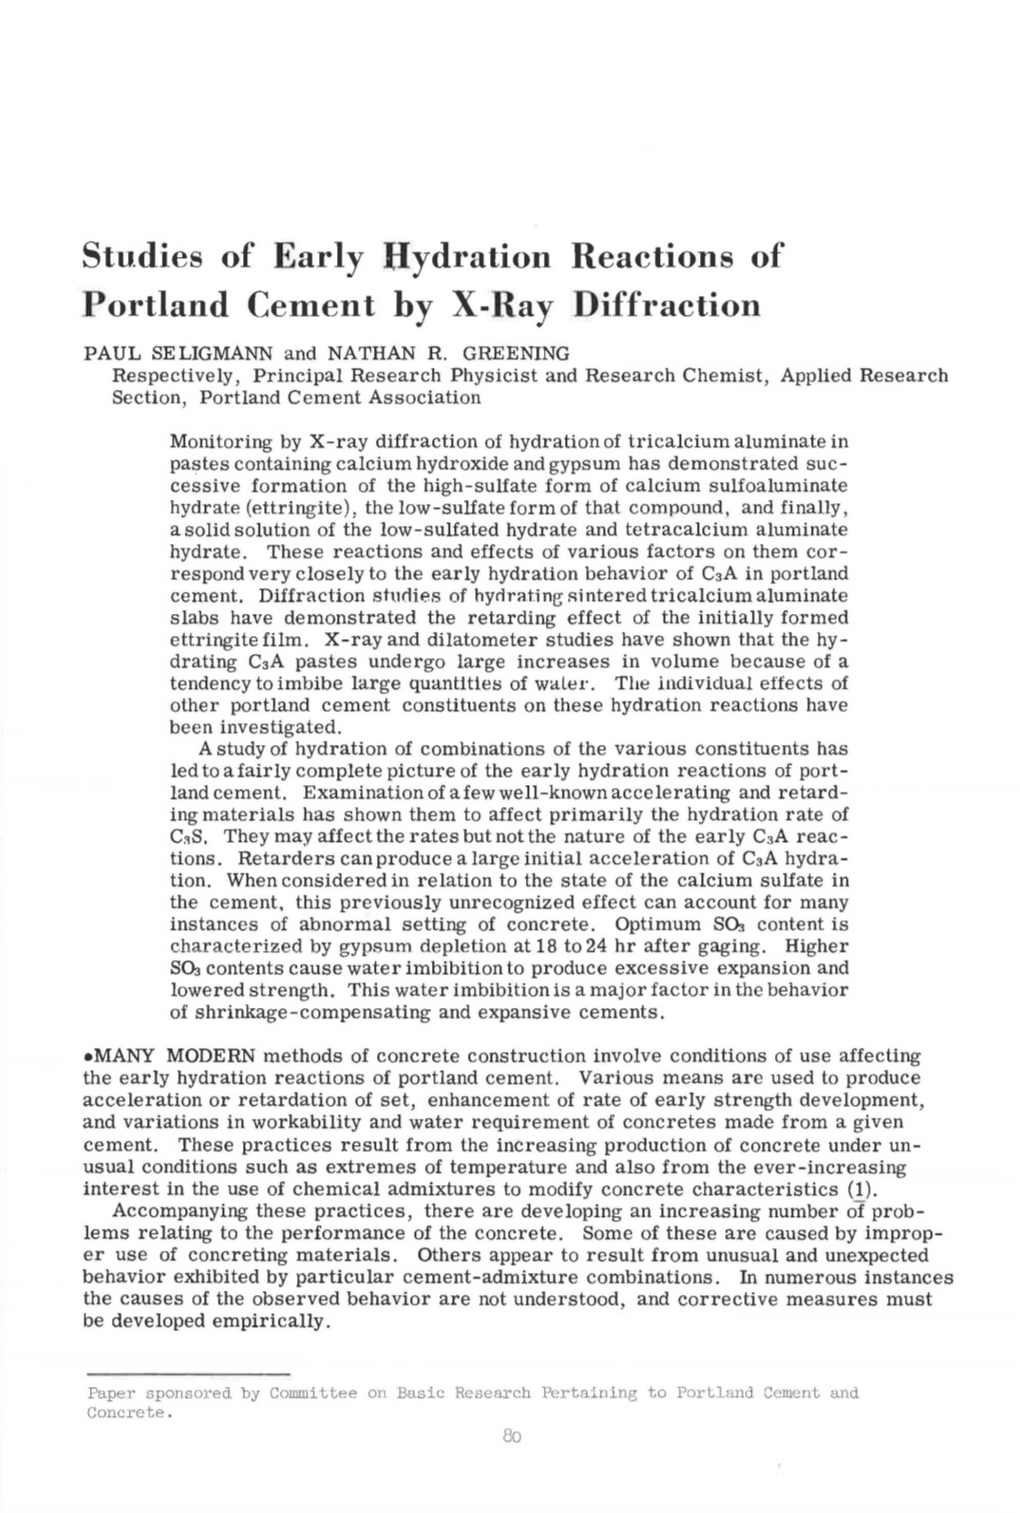 Studies of Early Hydration Reactions of Portland Cement by X-Ray Diffraction